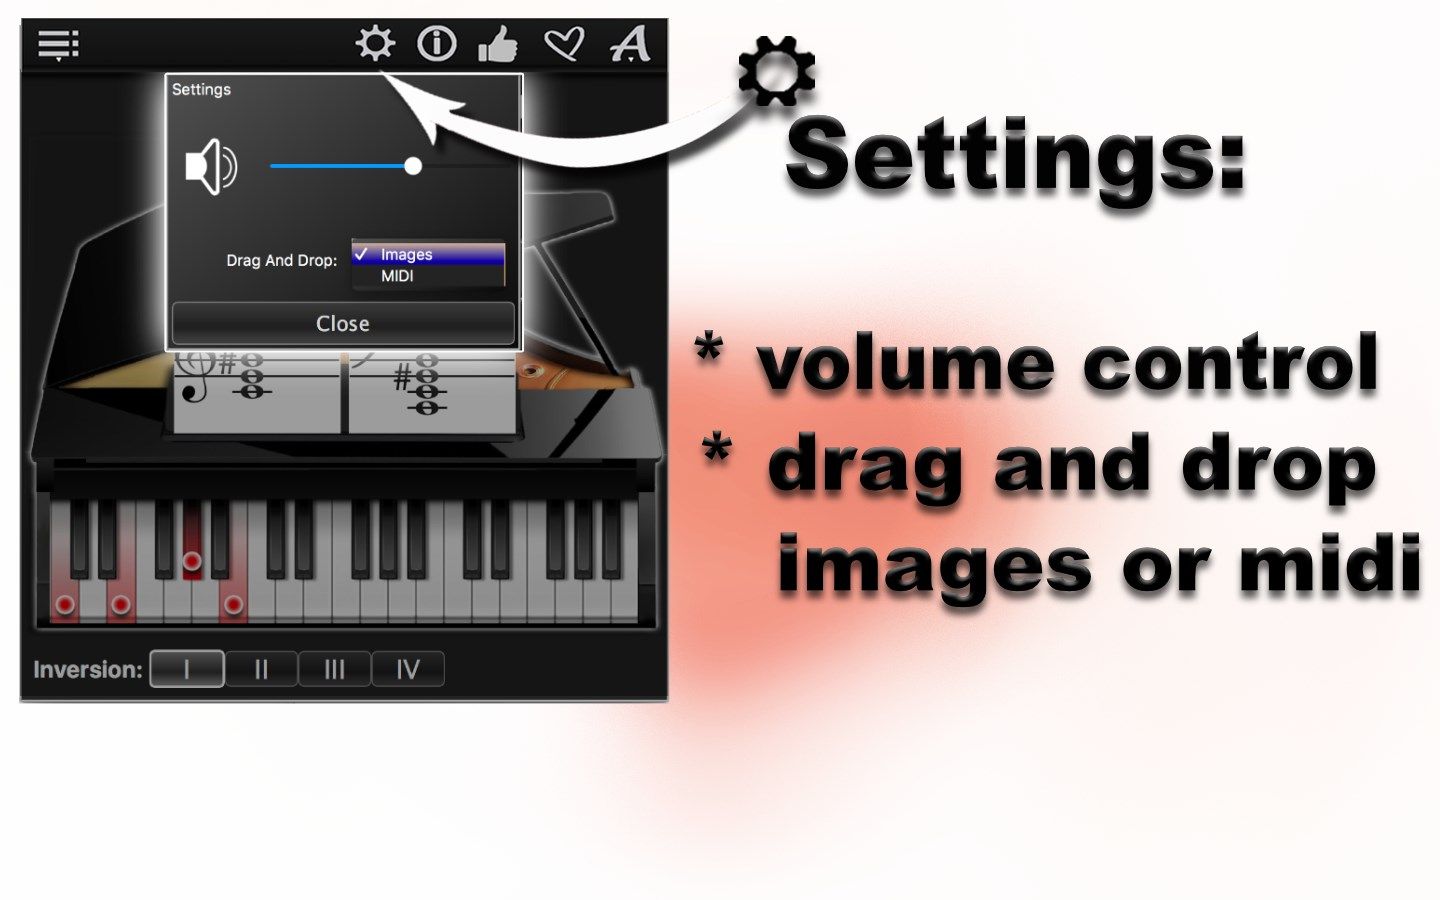 Piano Chords Compass